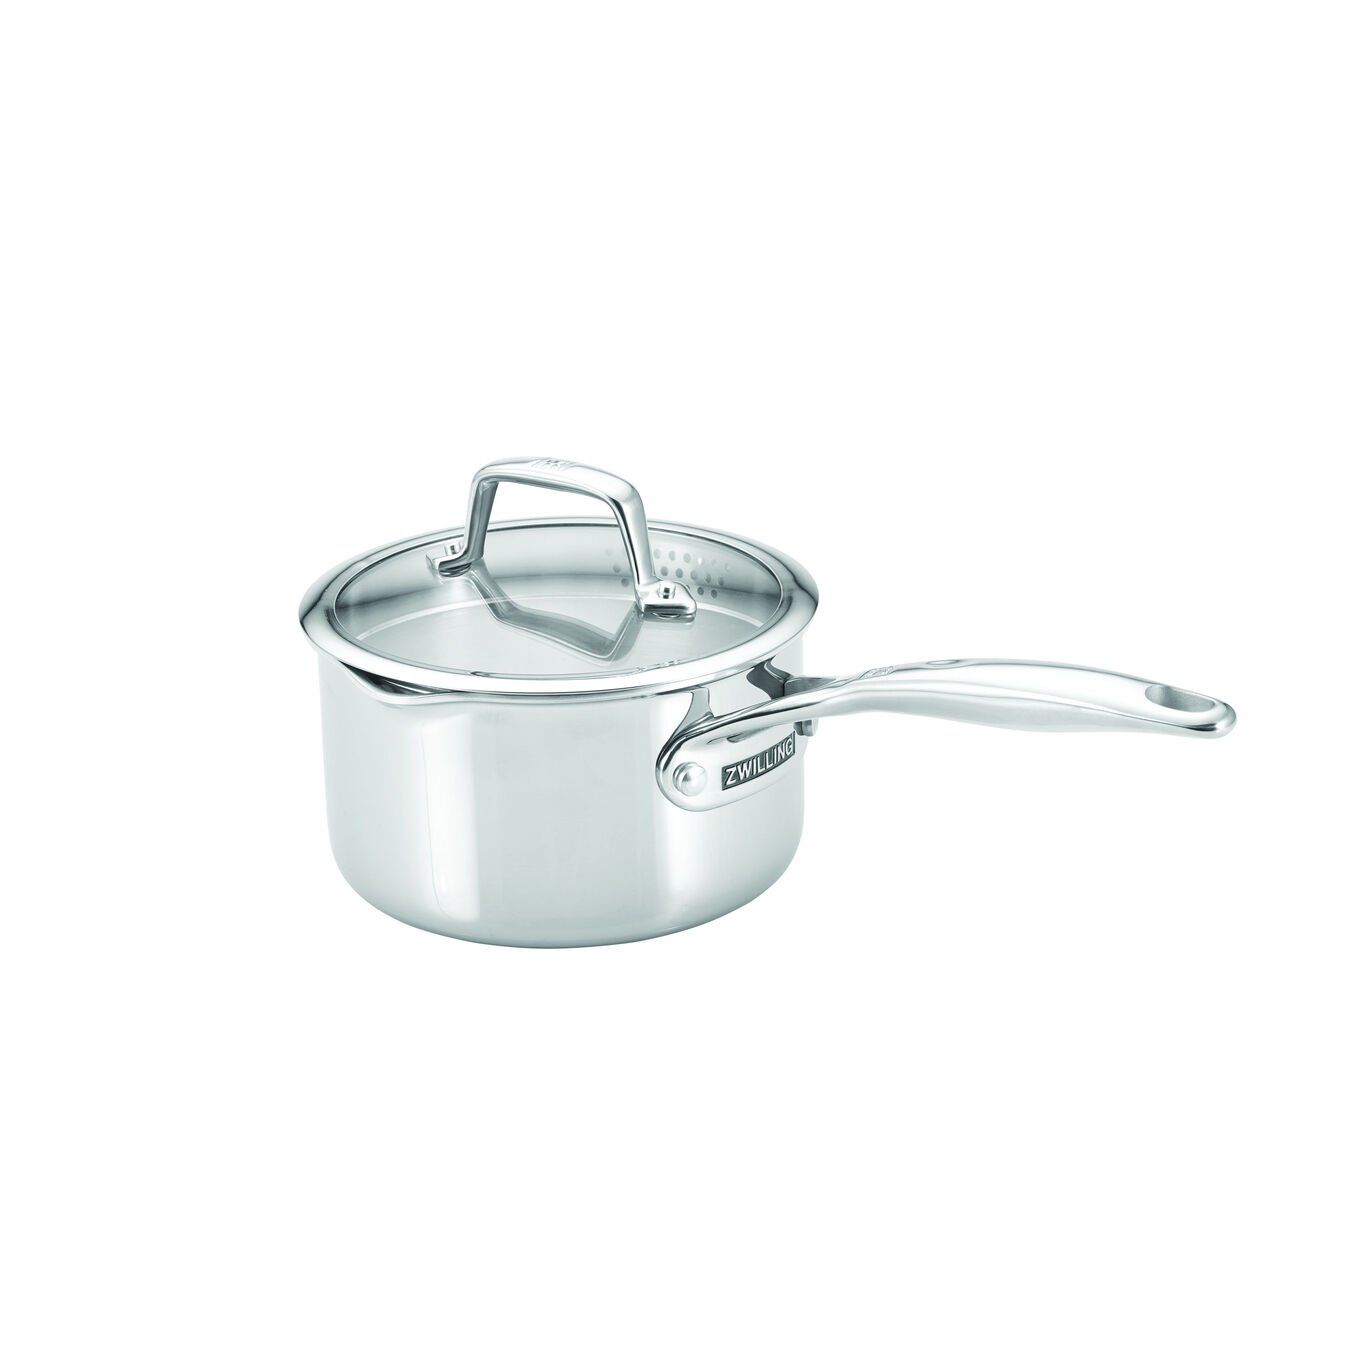 24 cm 18/10 Stainless Steel Saute pan,,large 5